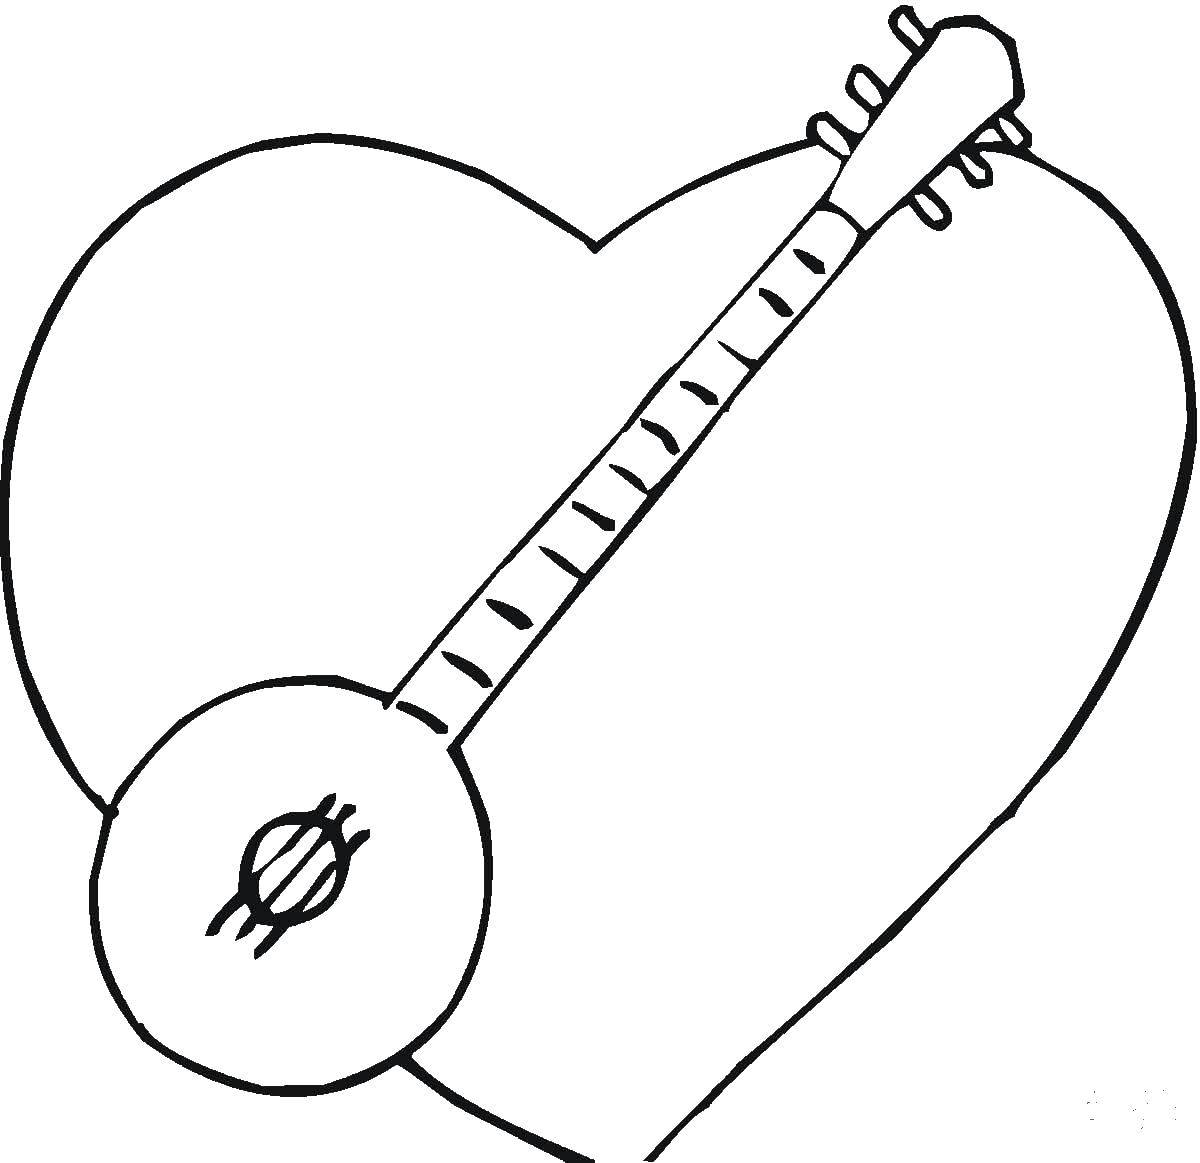 Coloring The key to your heart. Category Hearts. Tags:  Heart, love.